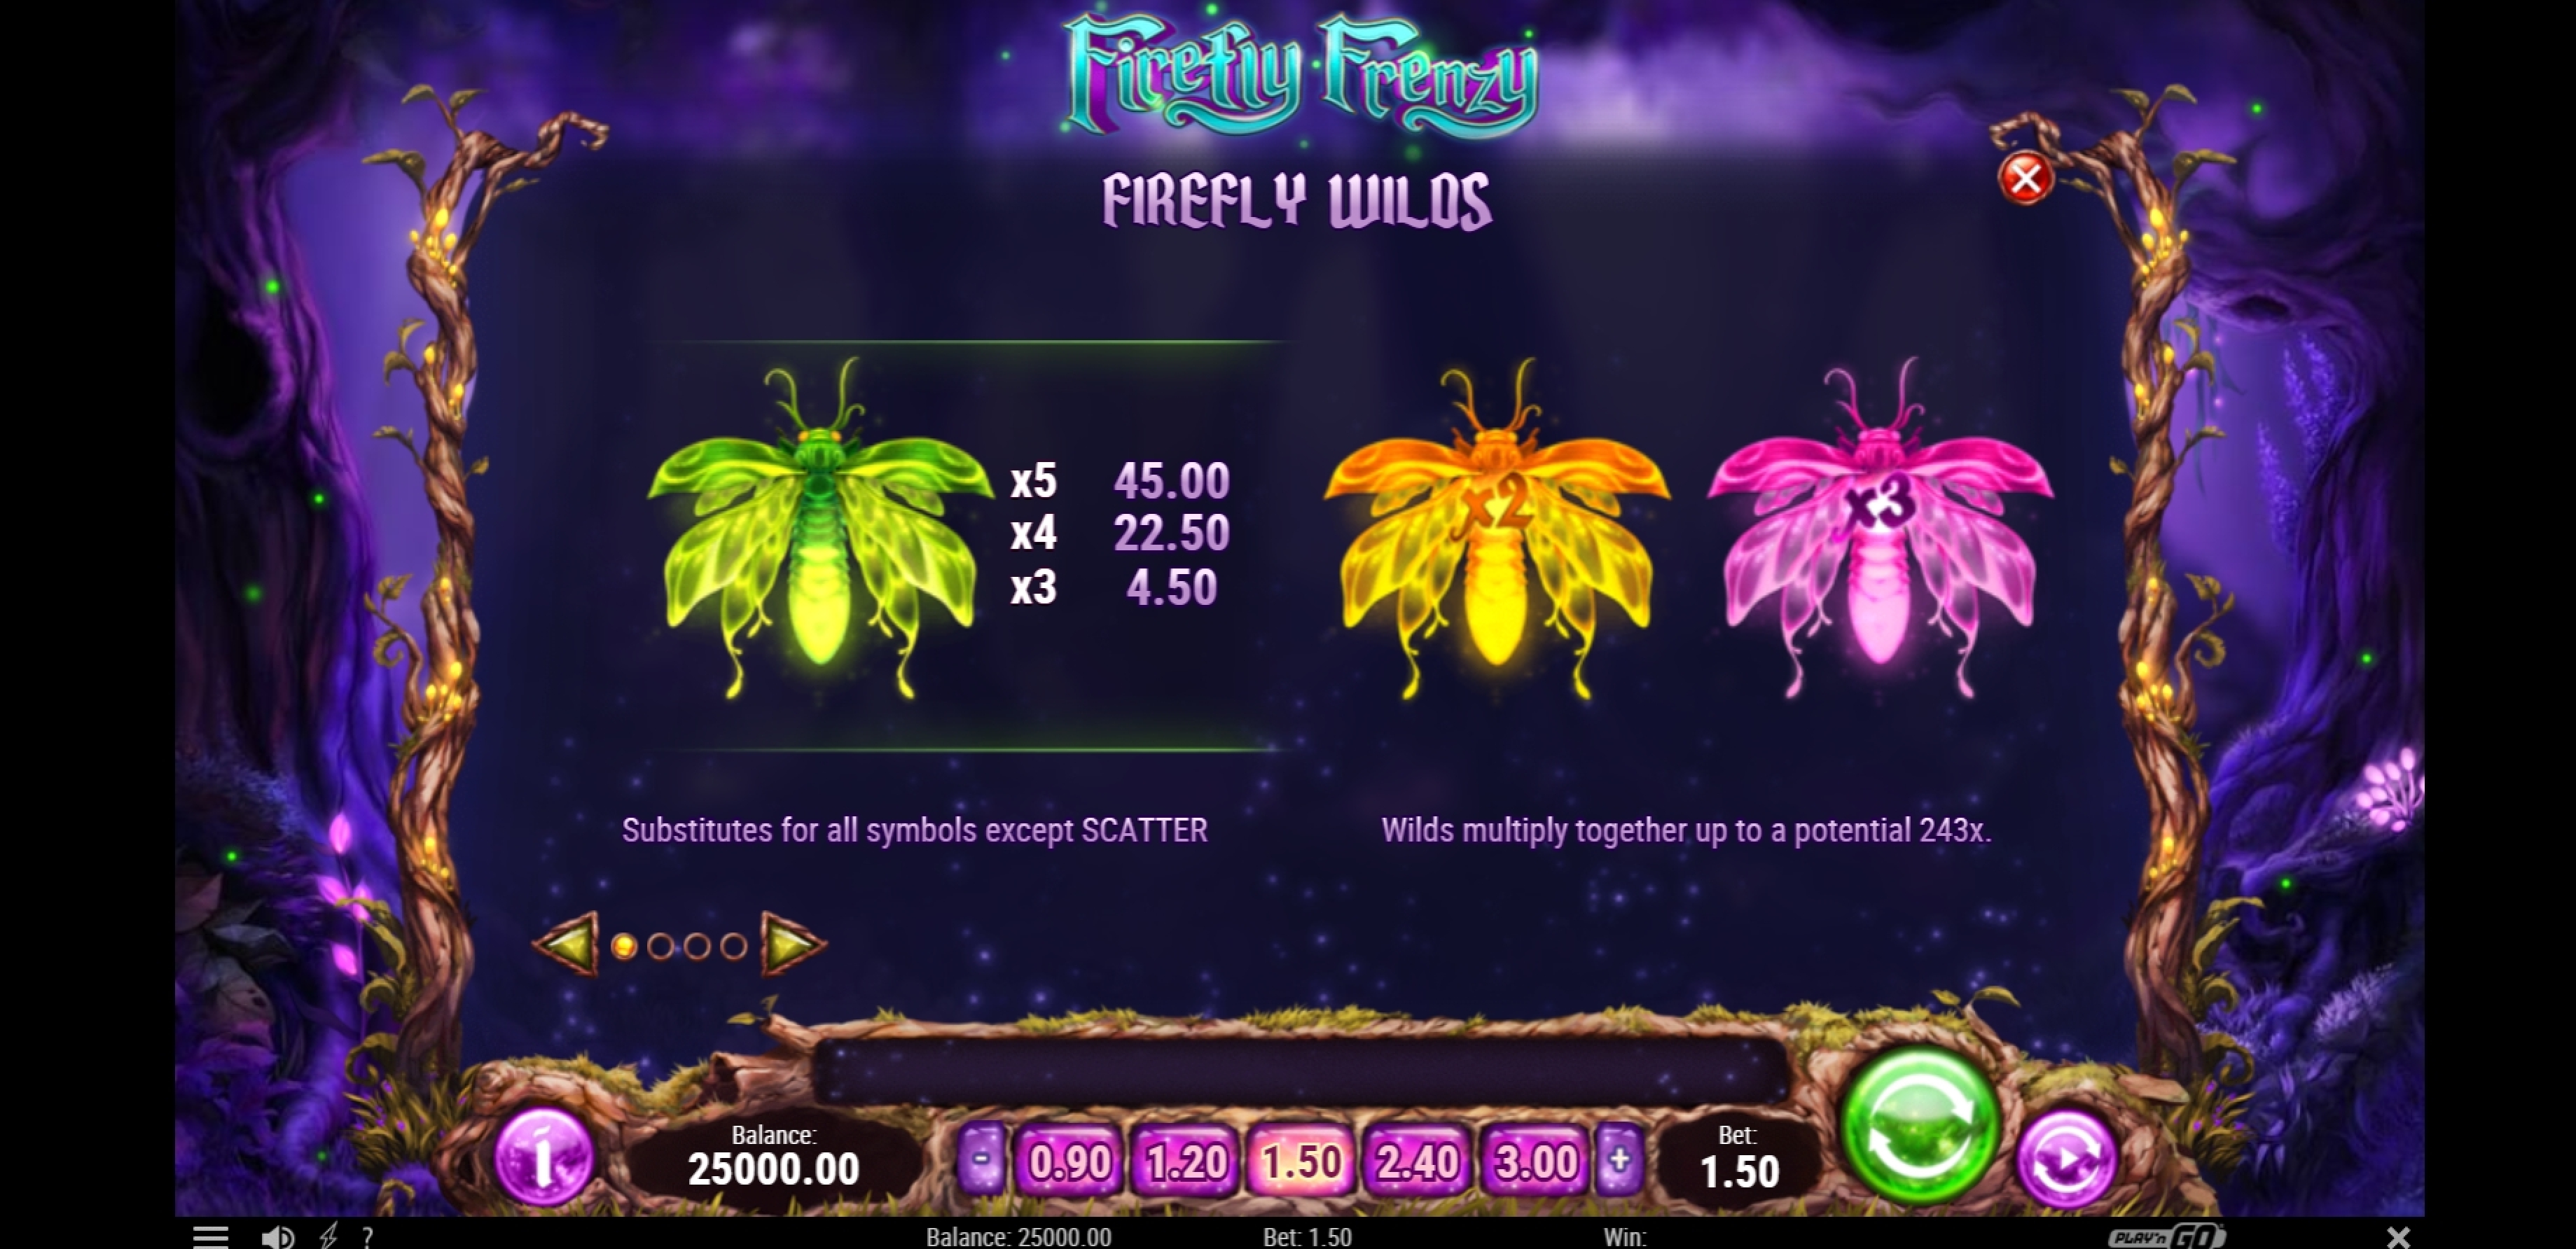 Info of Firefly Frenzy Slot Game by Playn GO